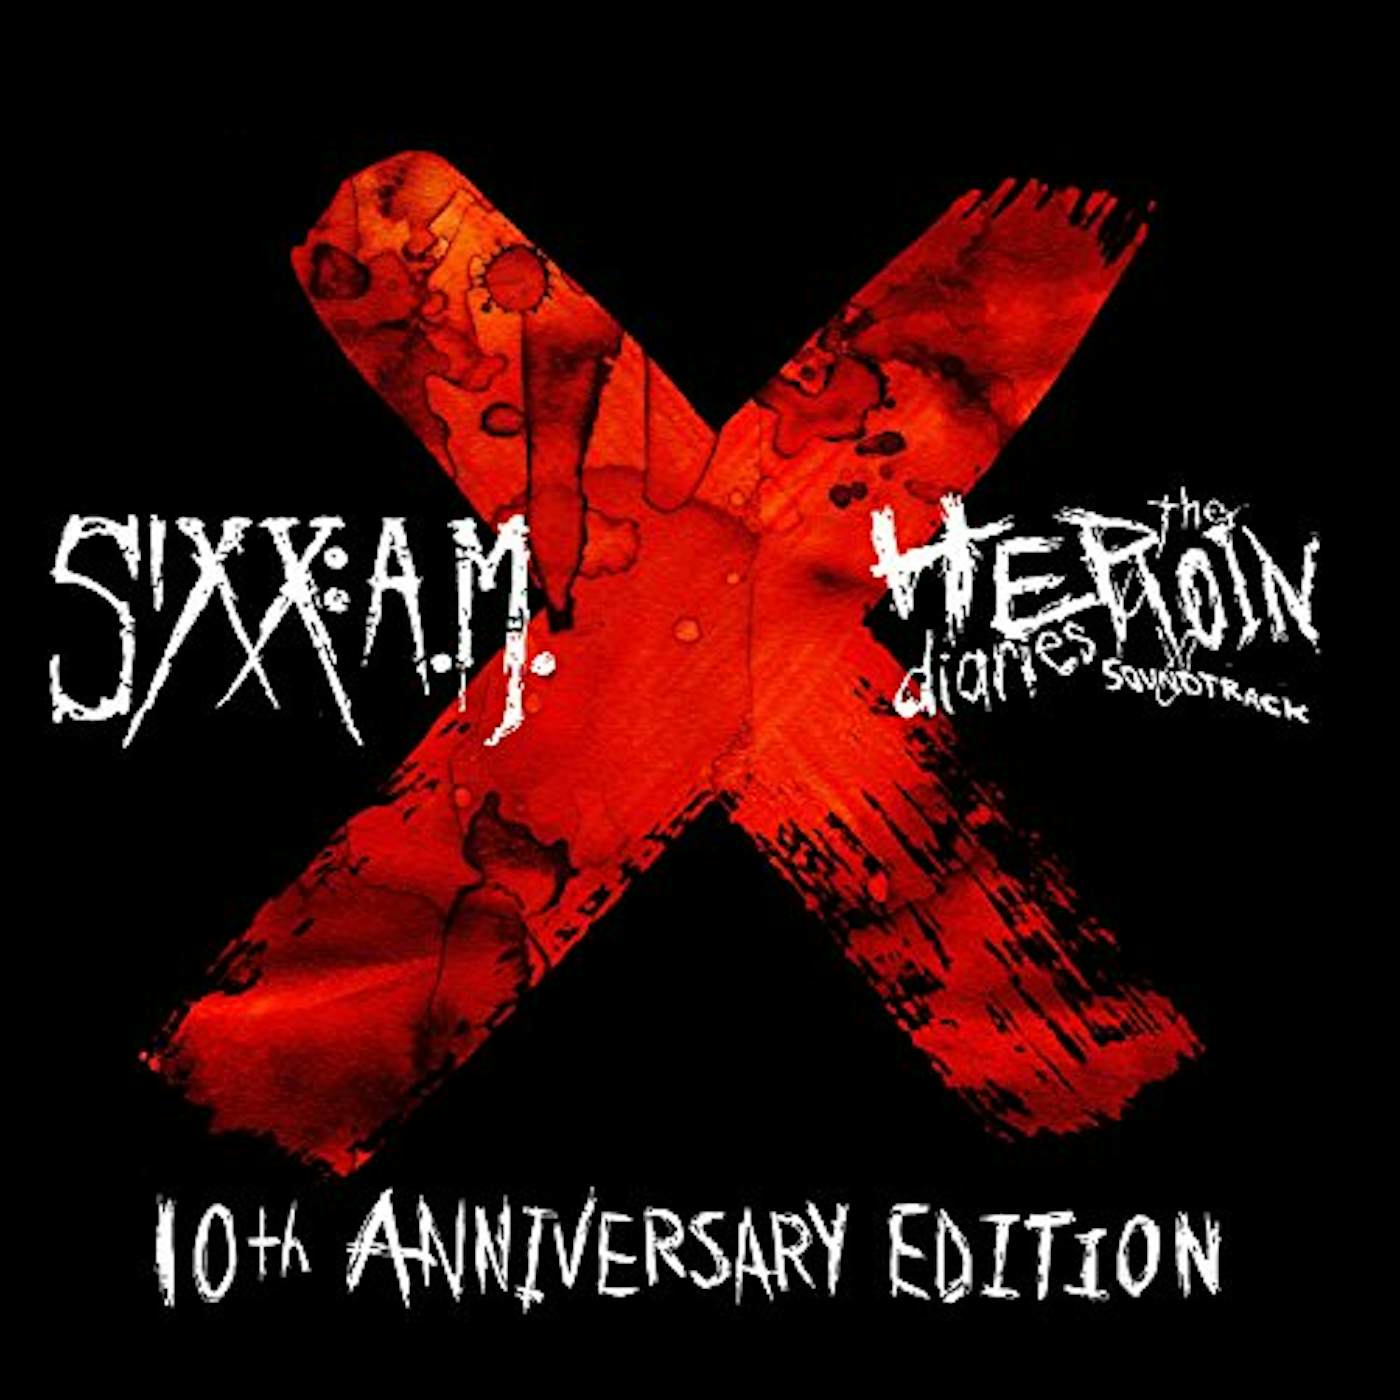 Sixx:A.M. HEROIN DIARIES SOUNDTRACK: 10TH ANNIVERSARY - Limited Edition 180 Gram Red & Black Marbled Double Vinyl Record